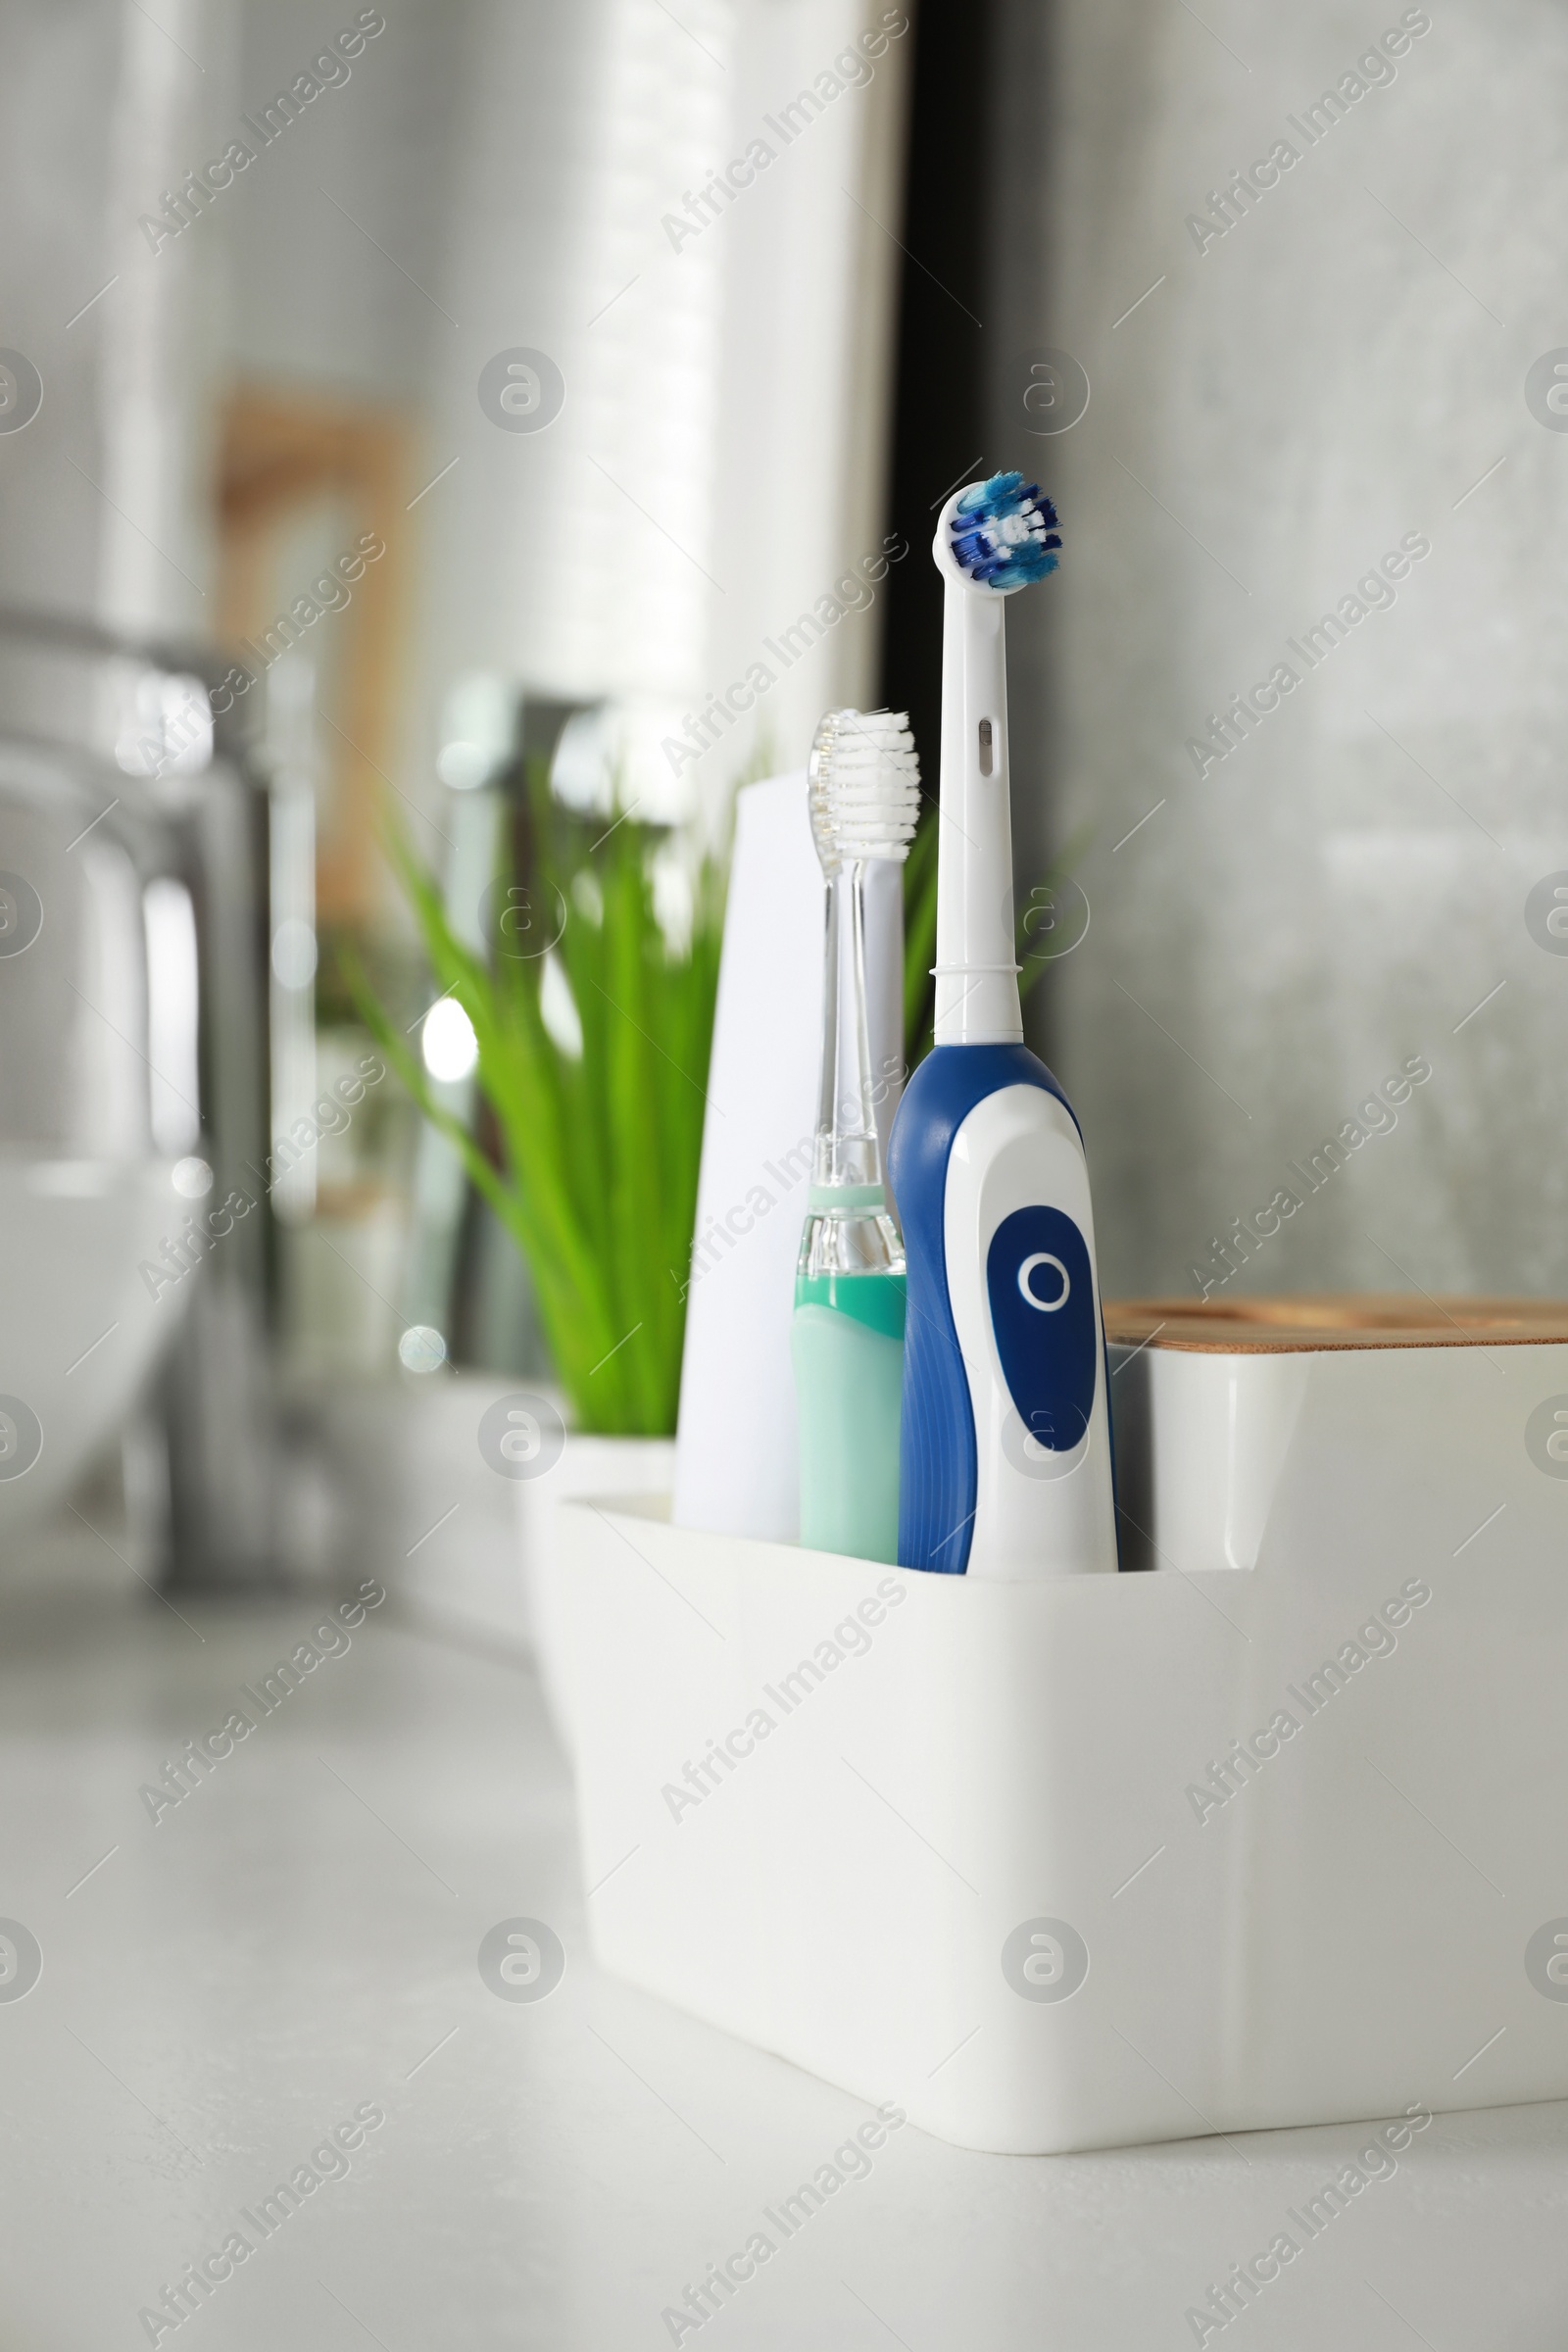 Photo of Electric toothbrushes and tube of paste on white countertop in bathroom